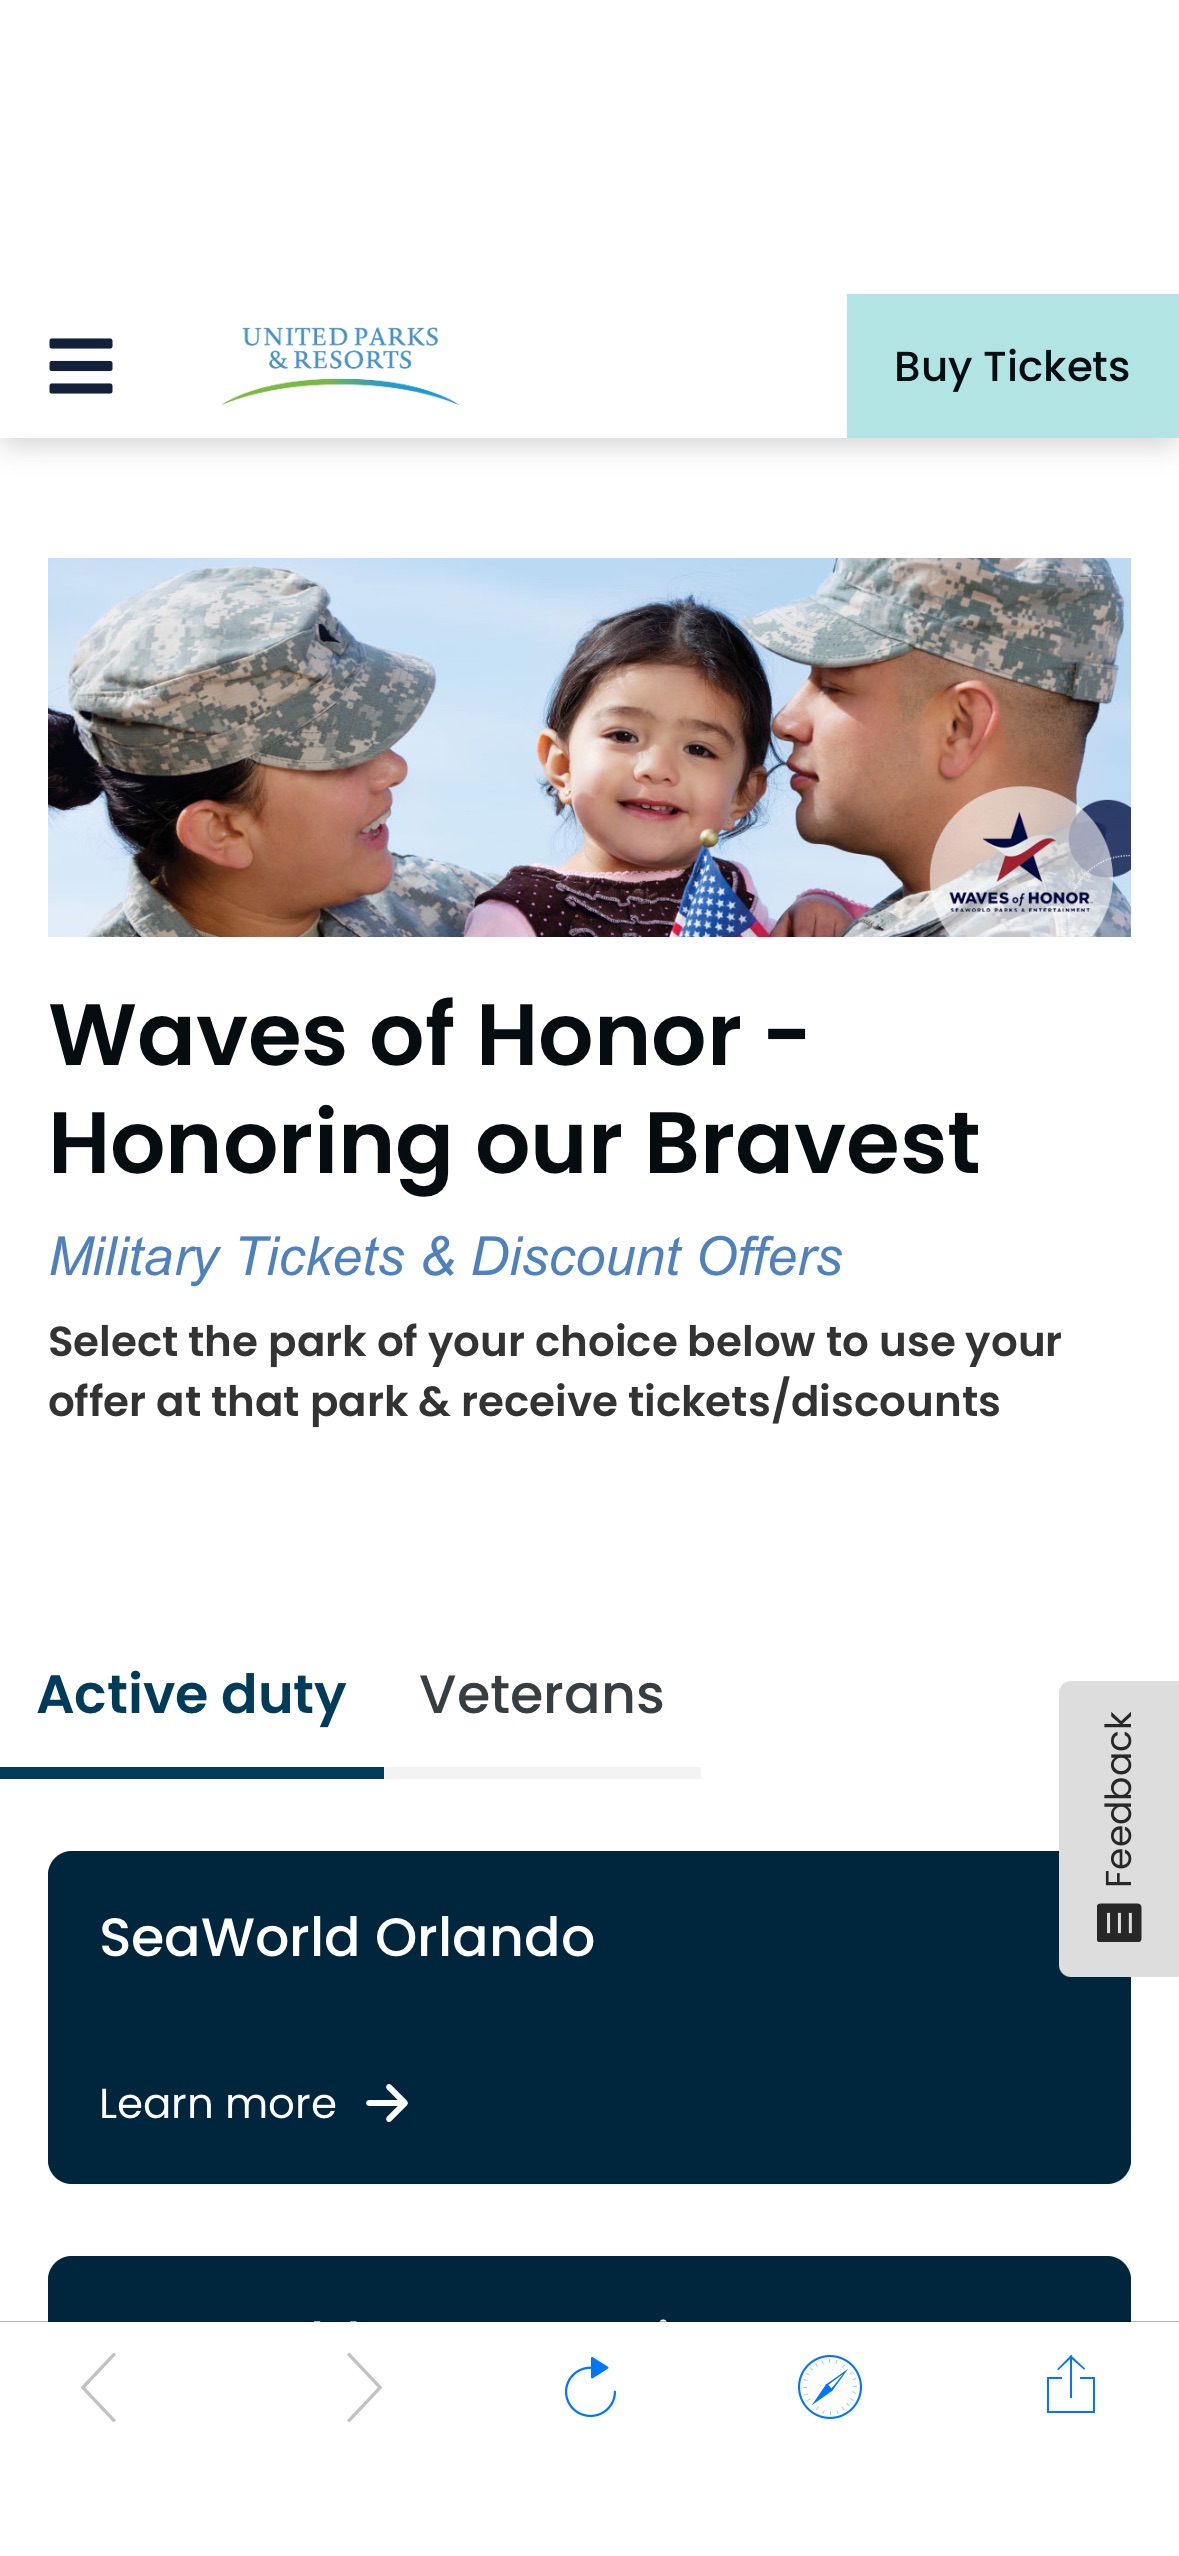 Free Admission to SeaWorld & Busch Gardens for U.S. Veterans + Guests ! Get yours online now through May 12 and have until July 7. Additionally, active-duty military and their guests continue to enjoy